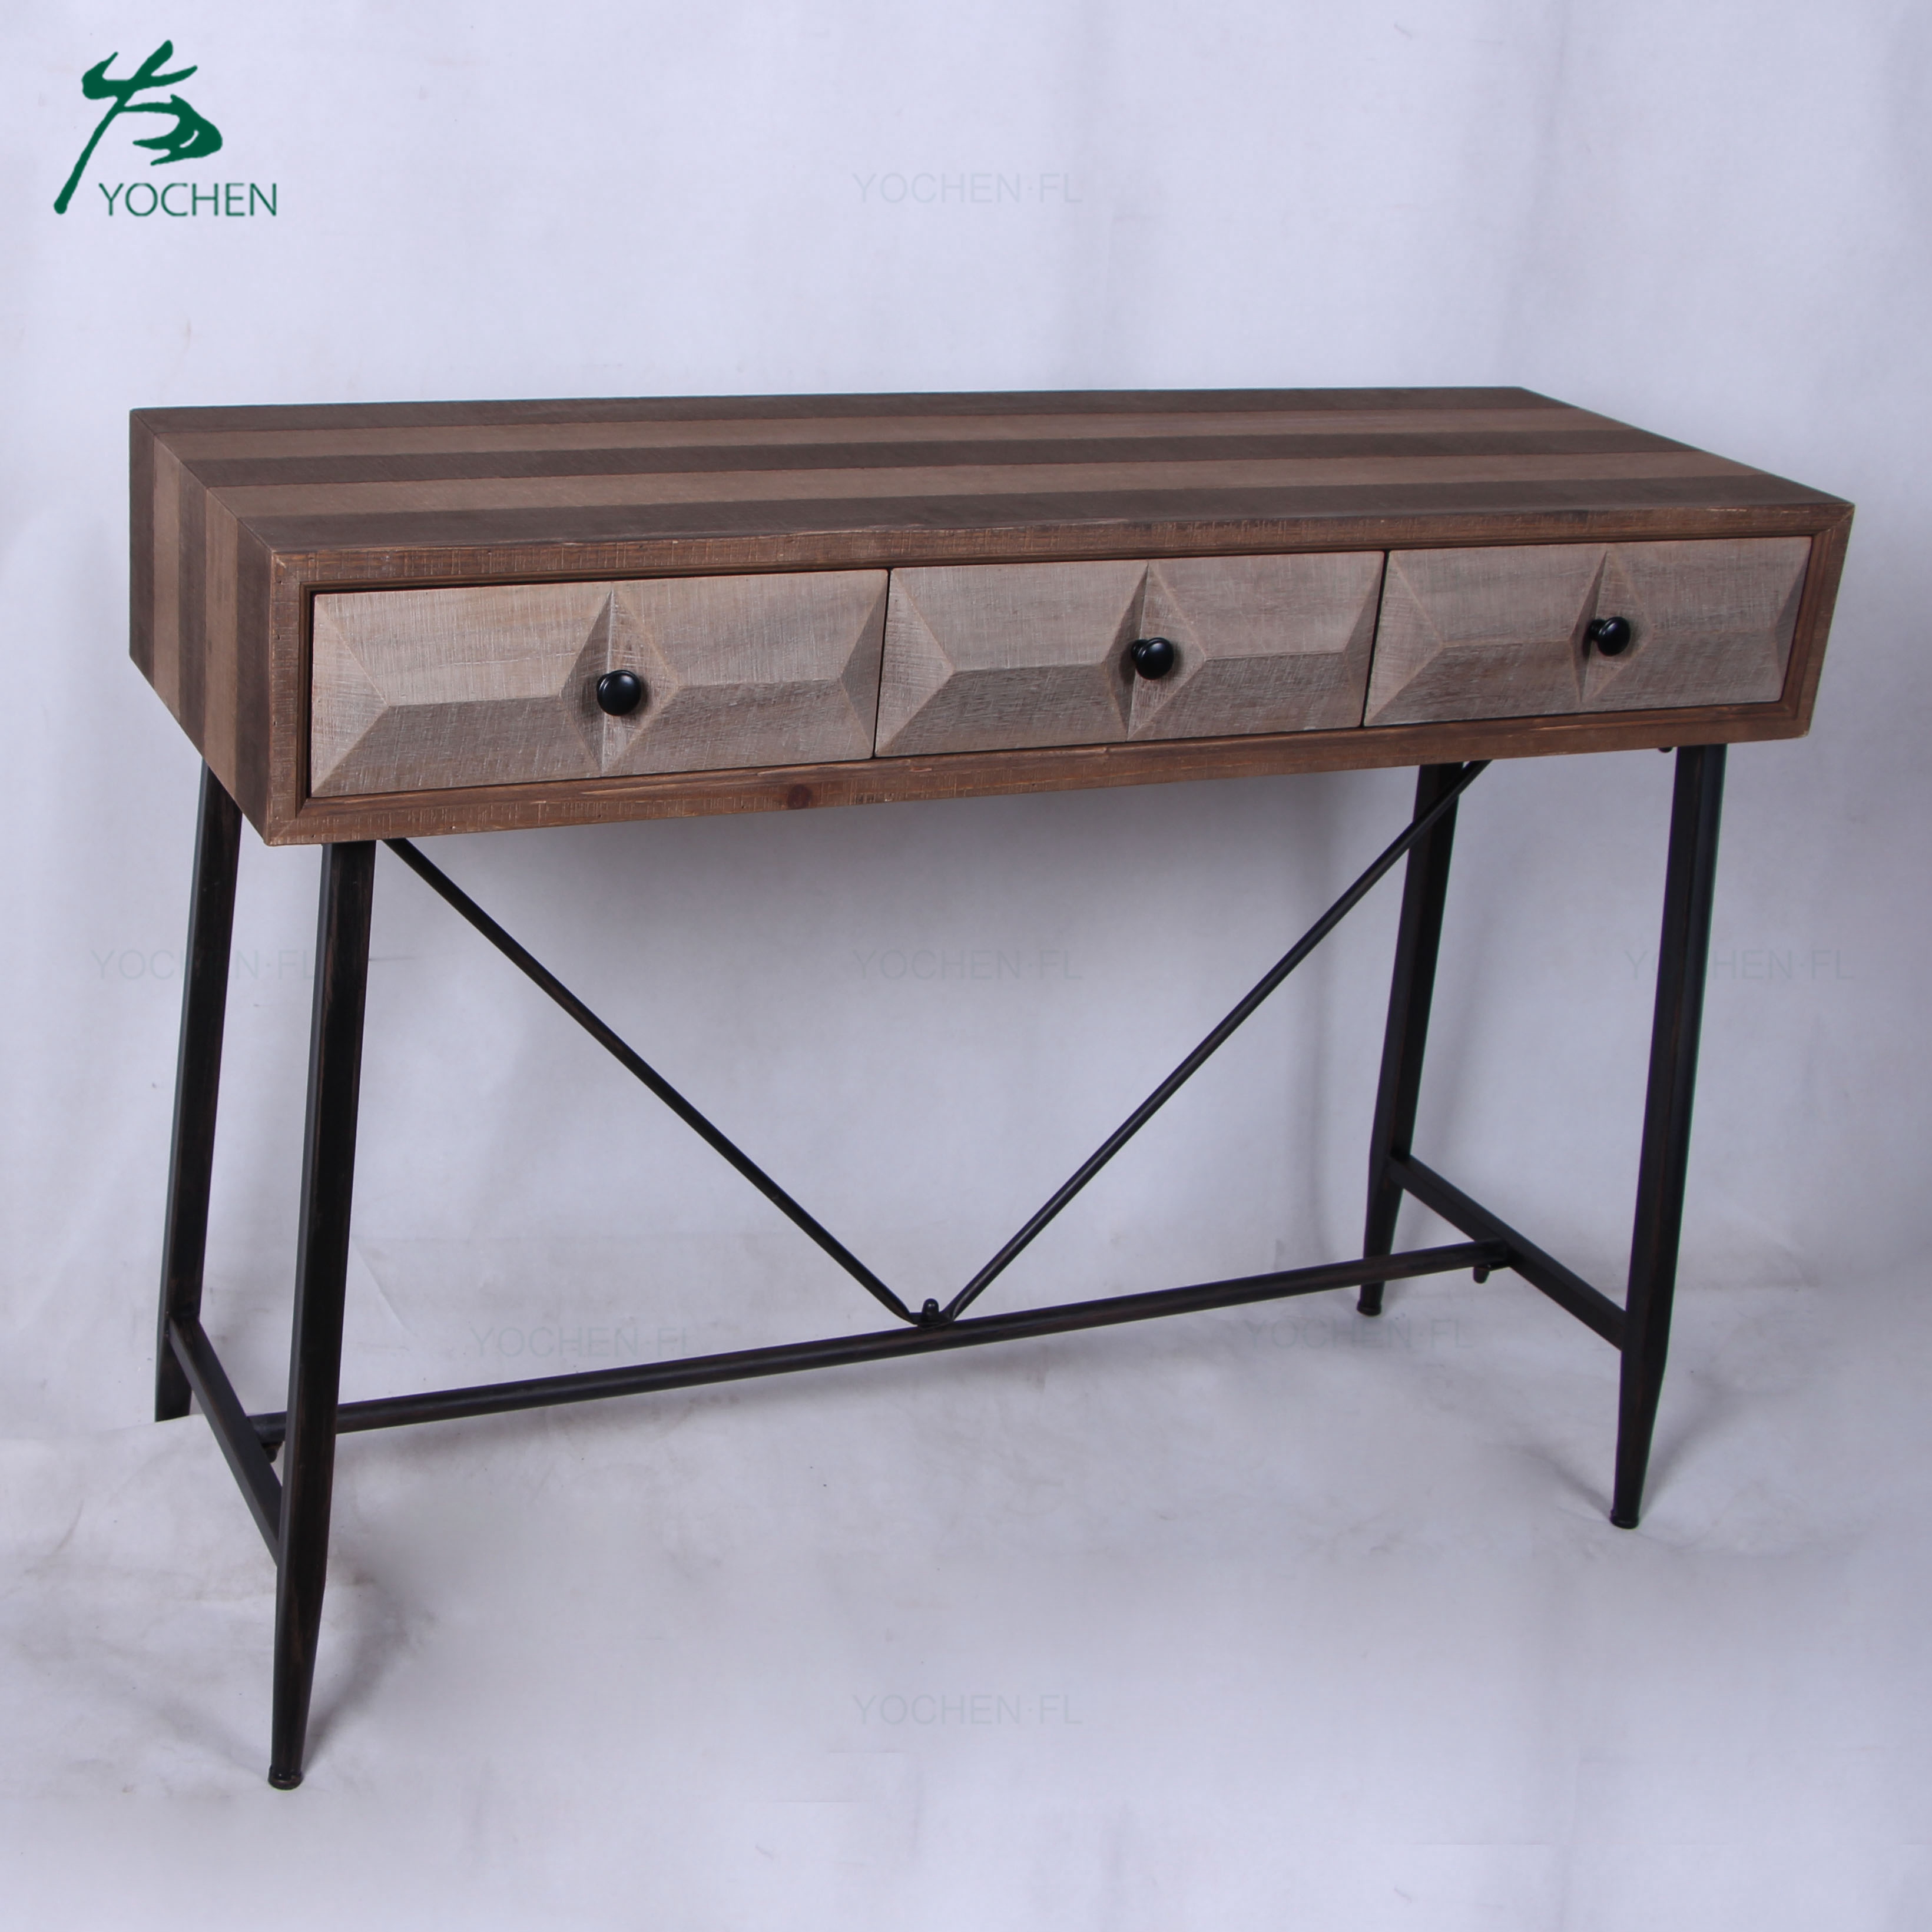 art deco console table industrial American wooden console table